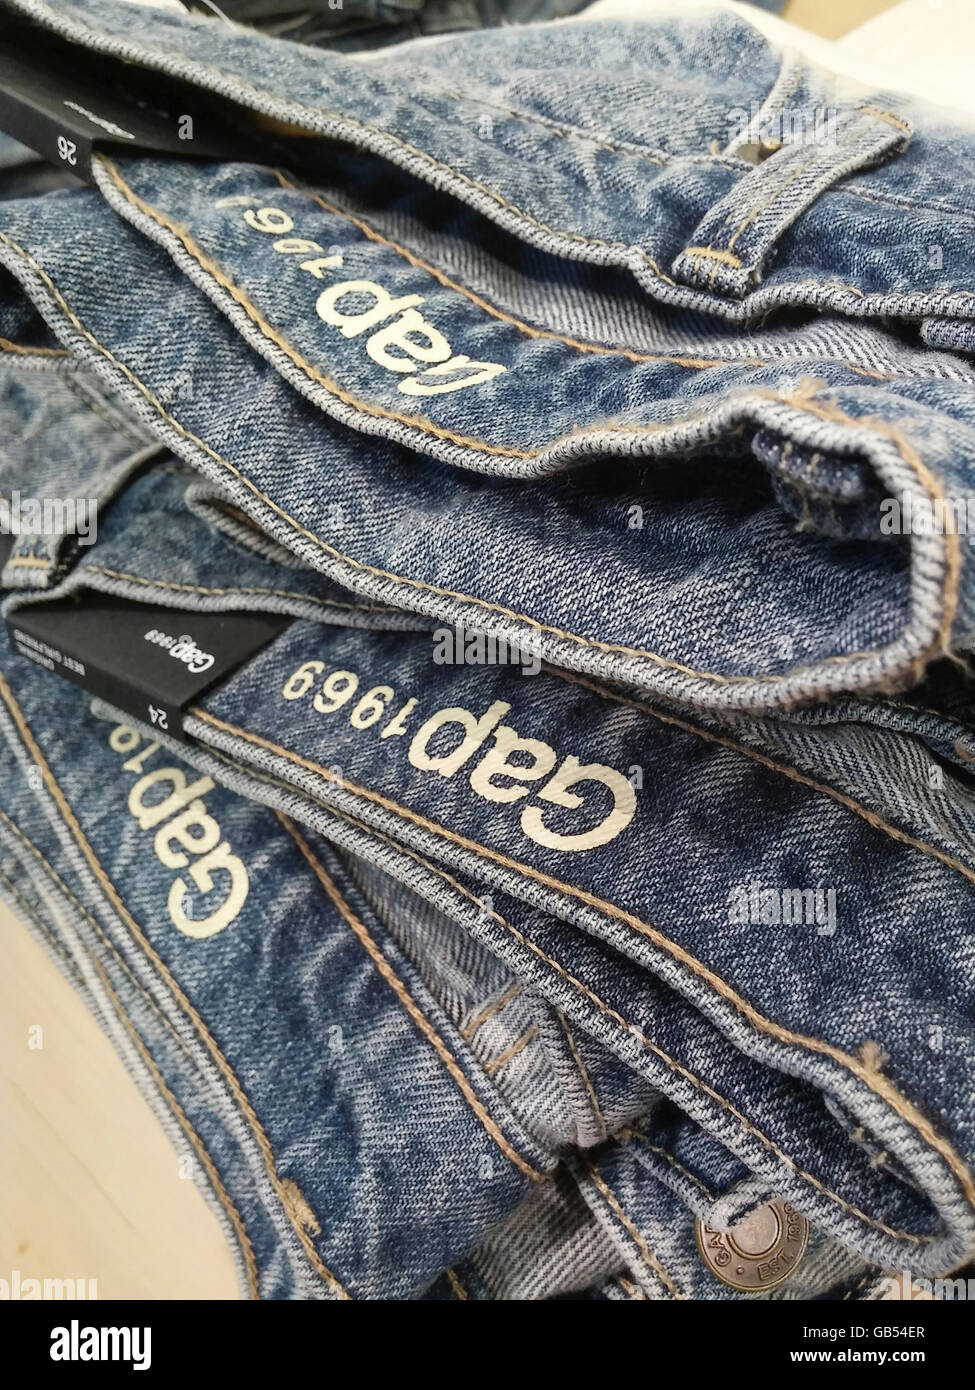 Gap 1969 brand jeans in a Gap store in New York on Monday, July 4, 2016.  (© Richard B. Levine) Stock Photo